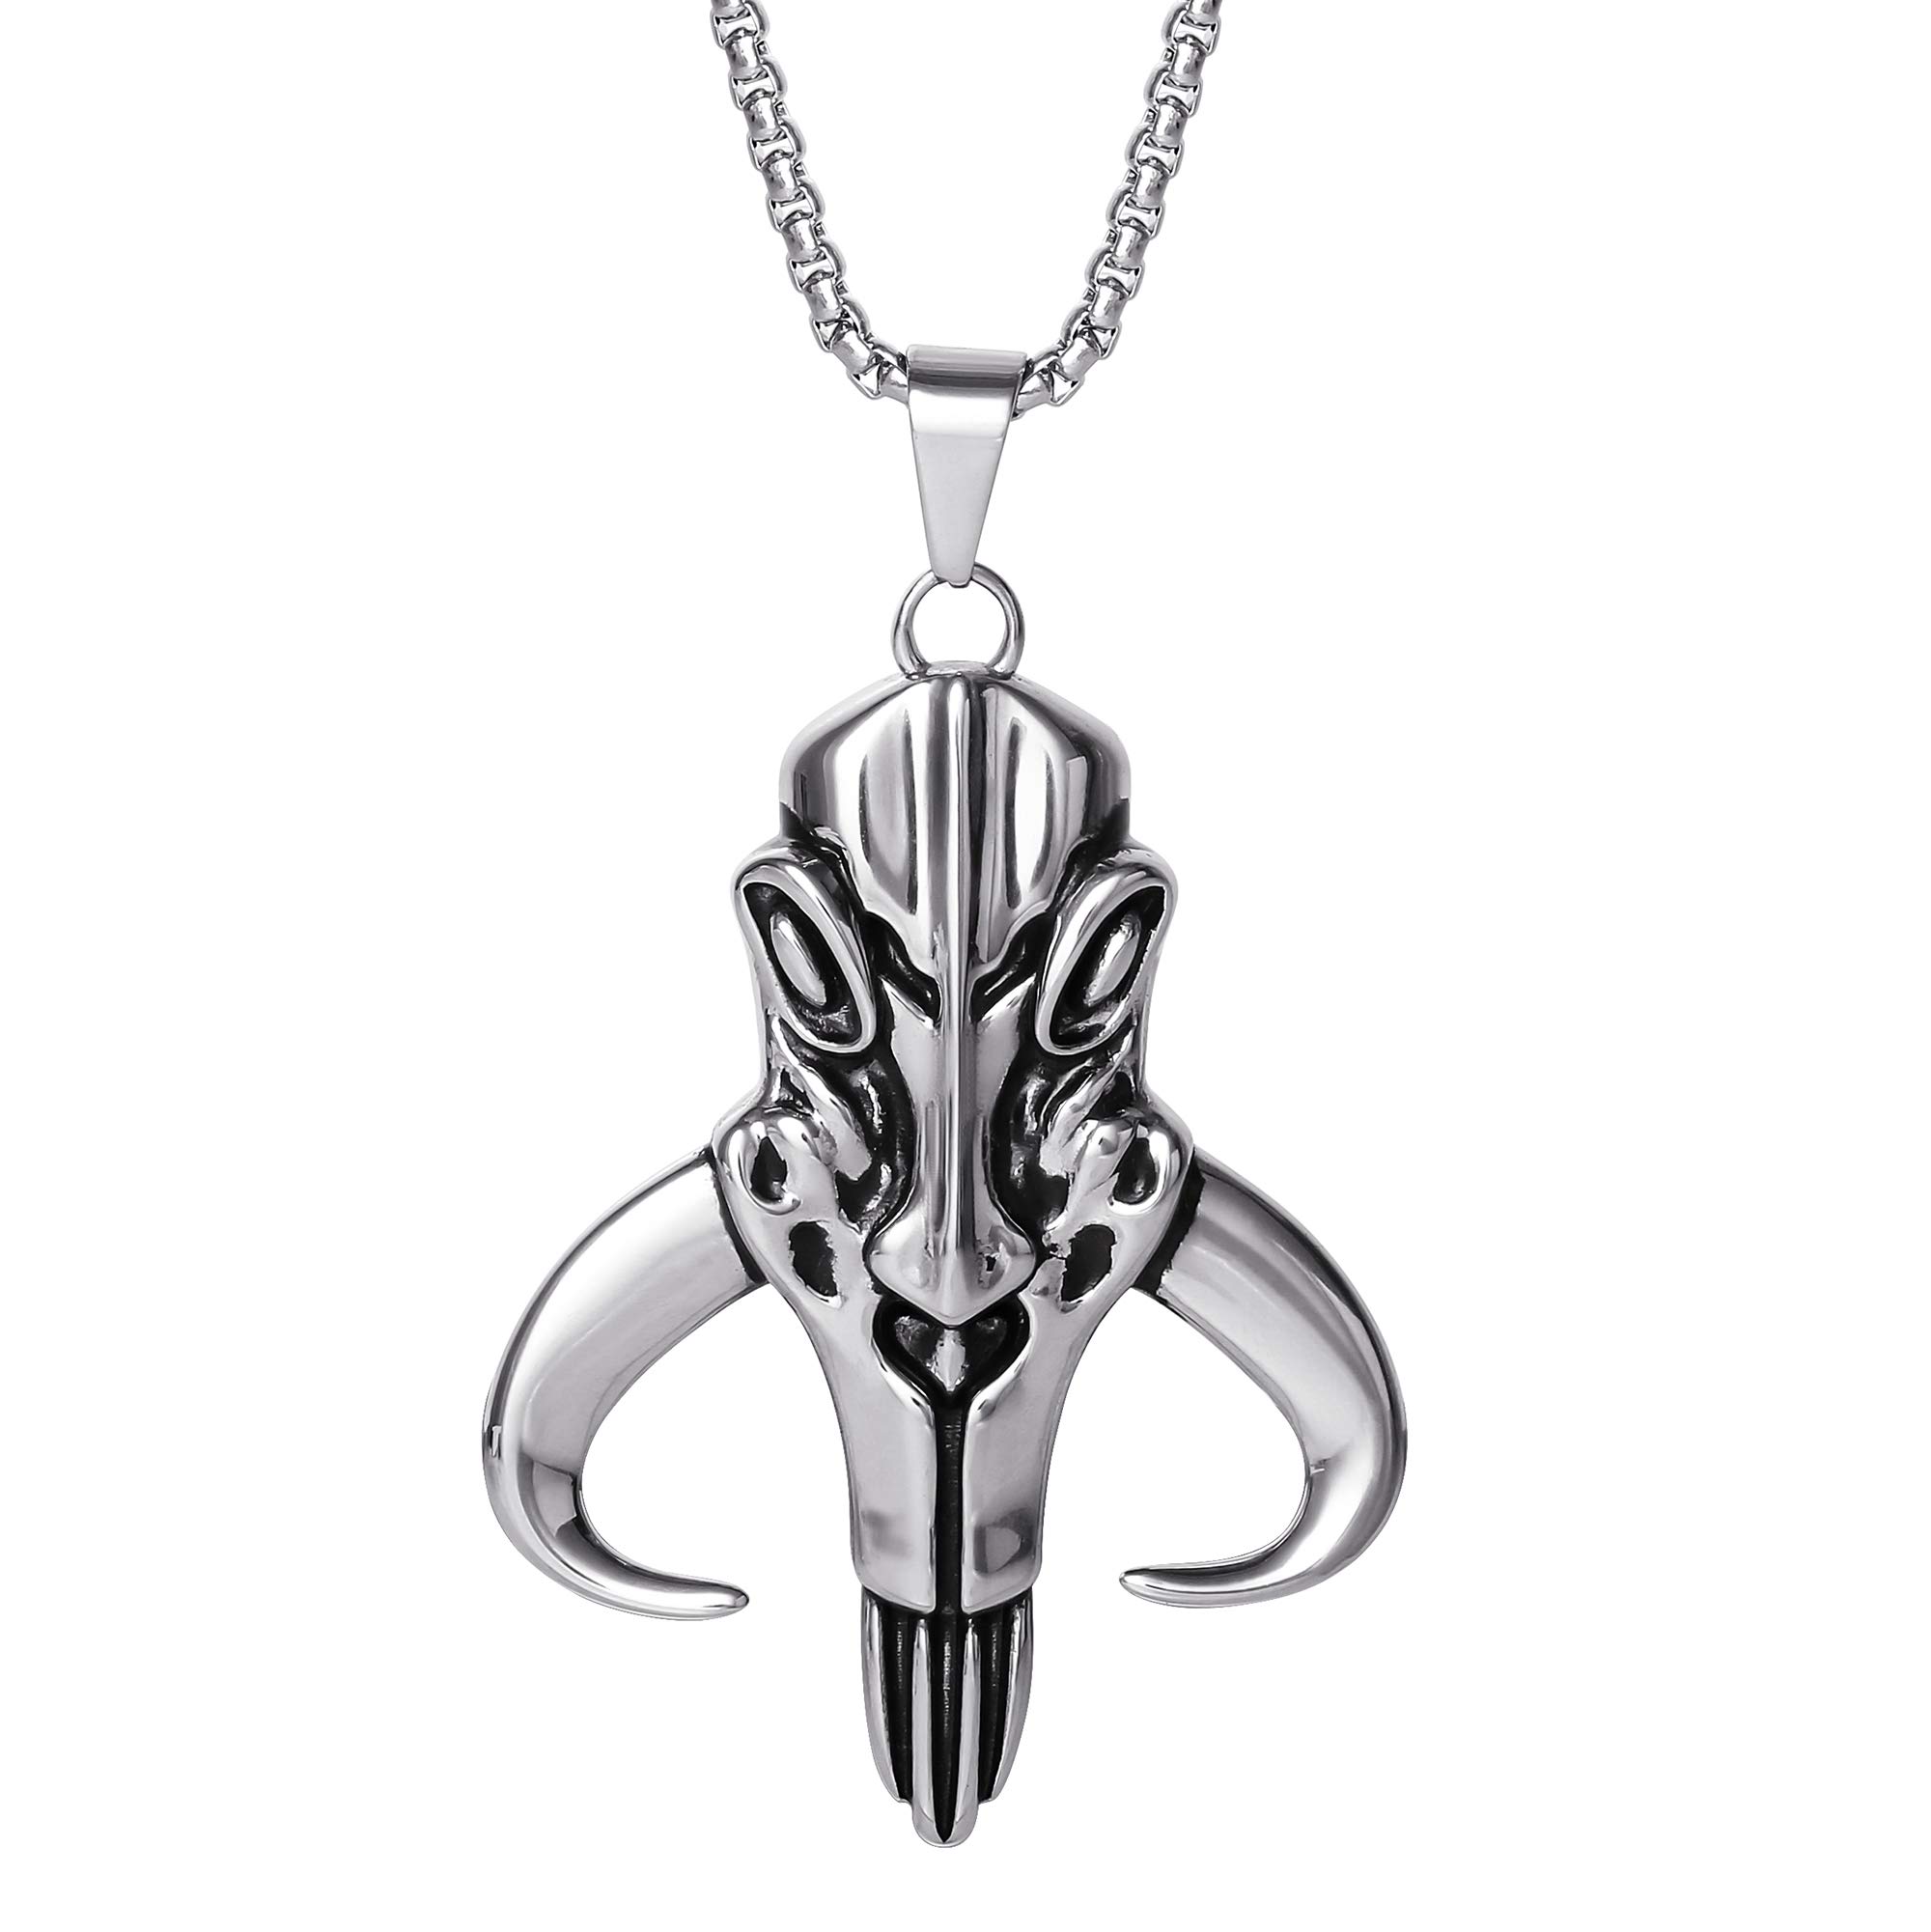 Star Wars Stainless Steel Necklaces for Men, Character Pendant Designs, 22